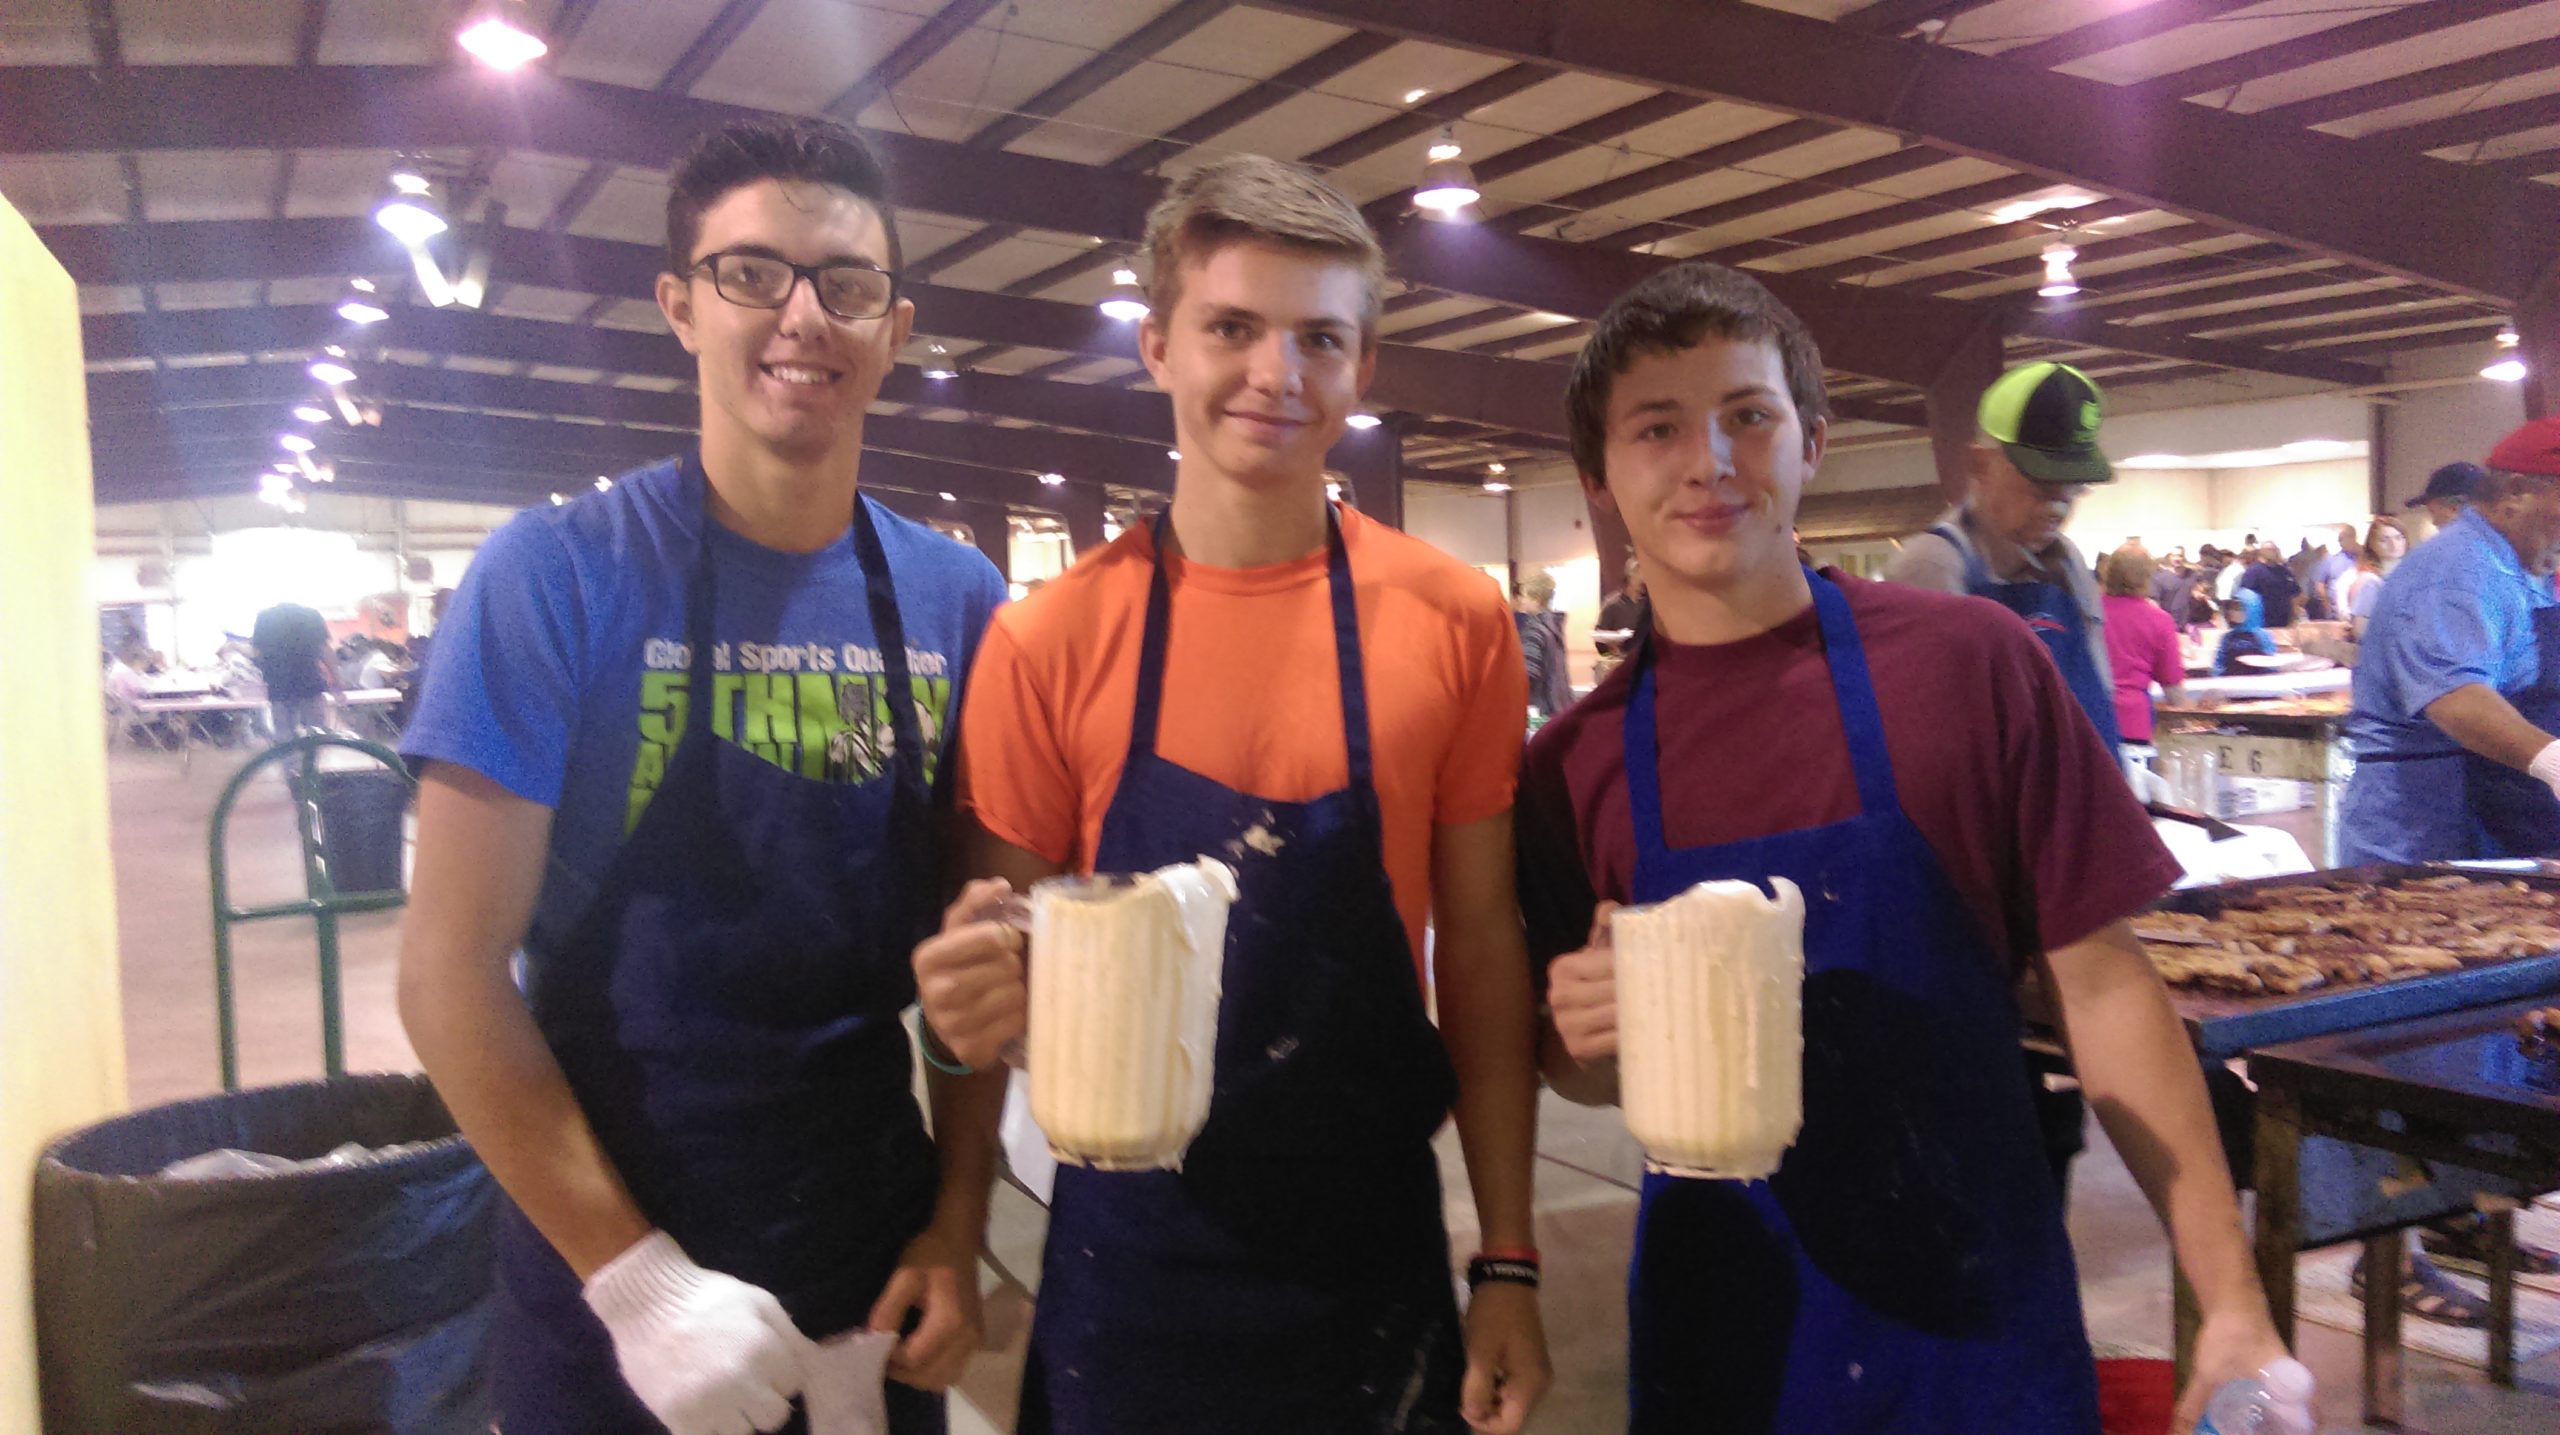 Premier Amarillo Students Volunteer Their Time to Help Kids in Need